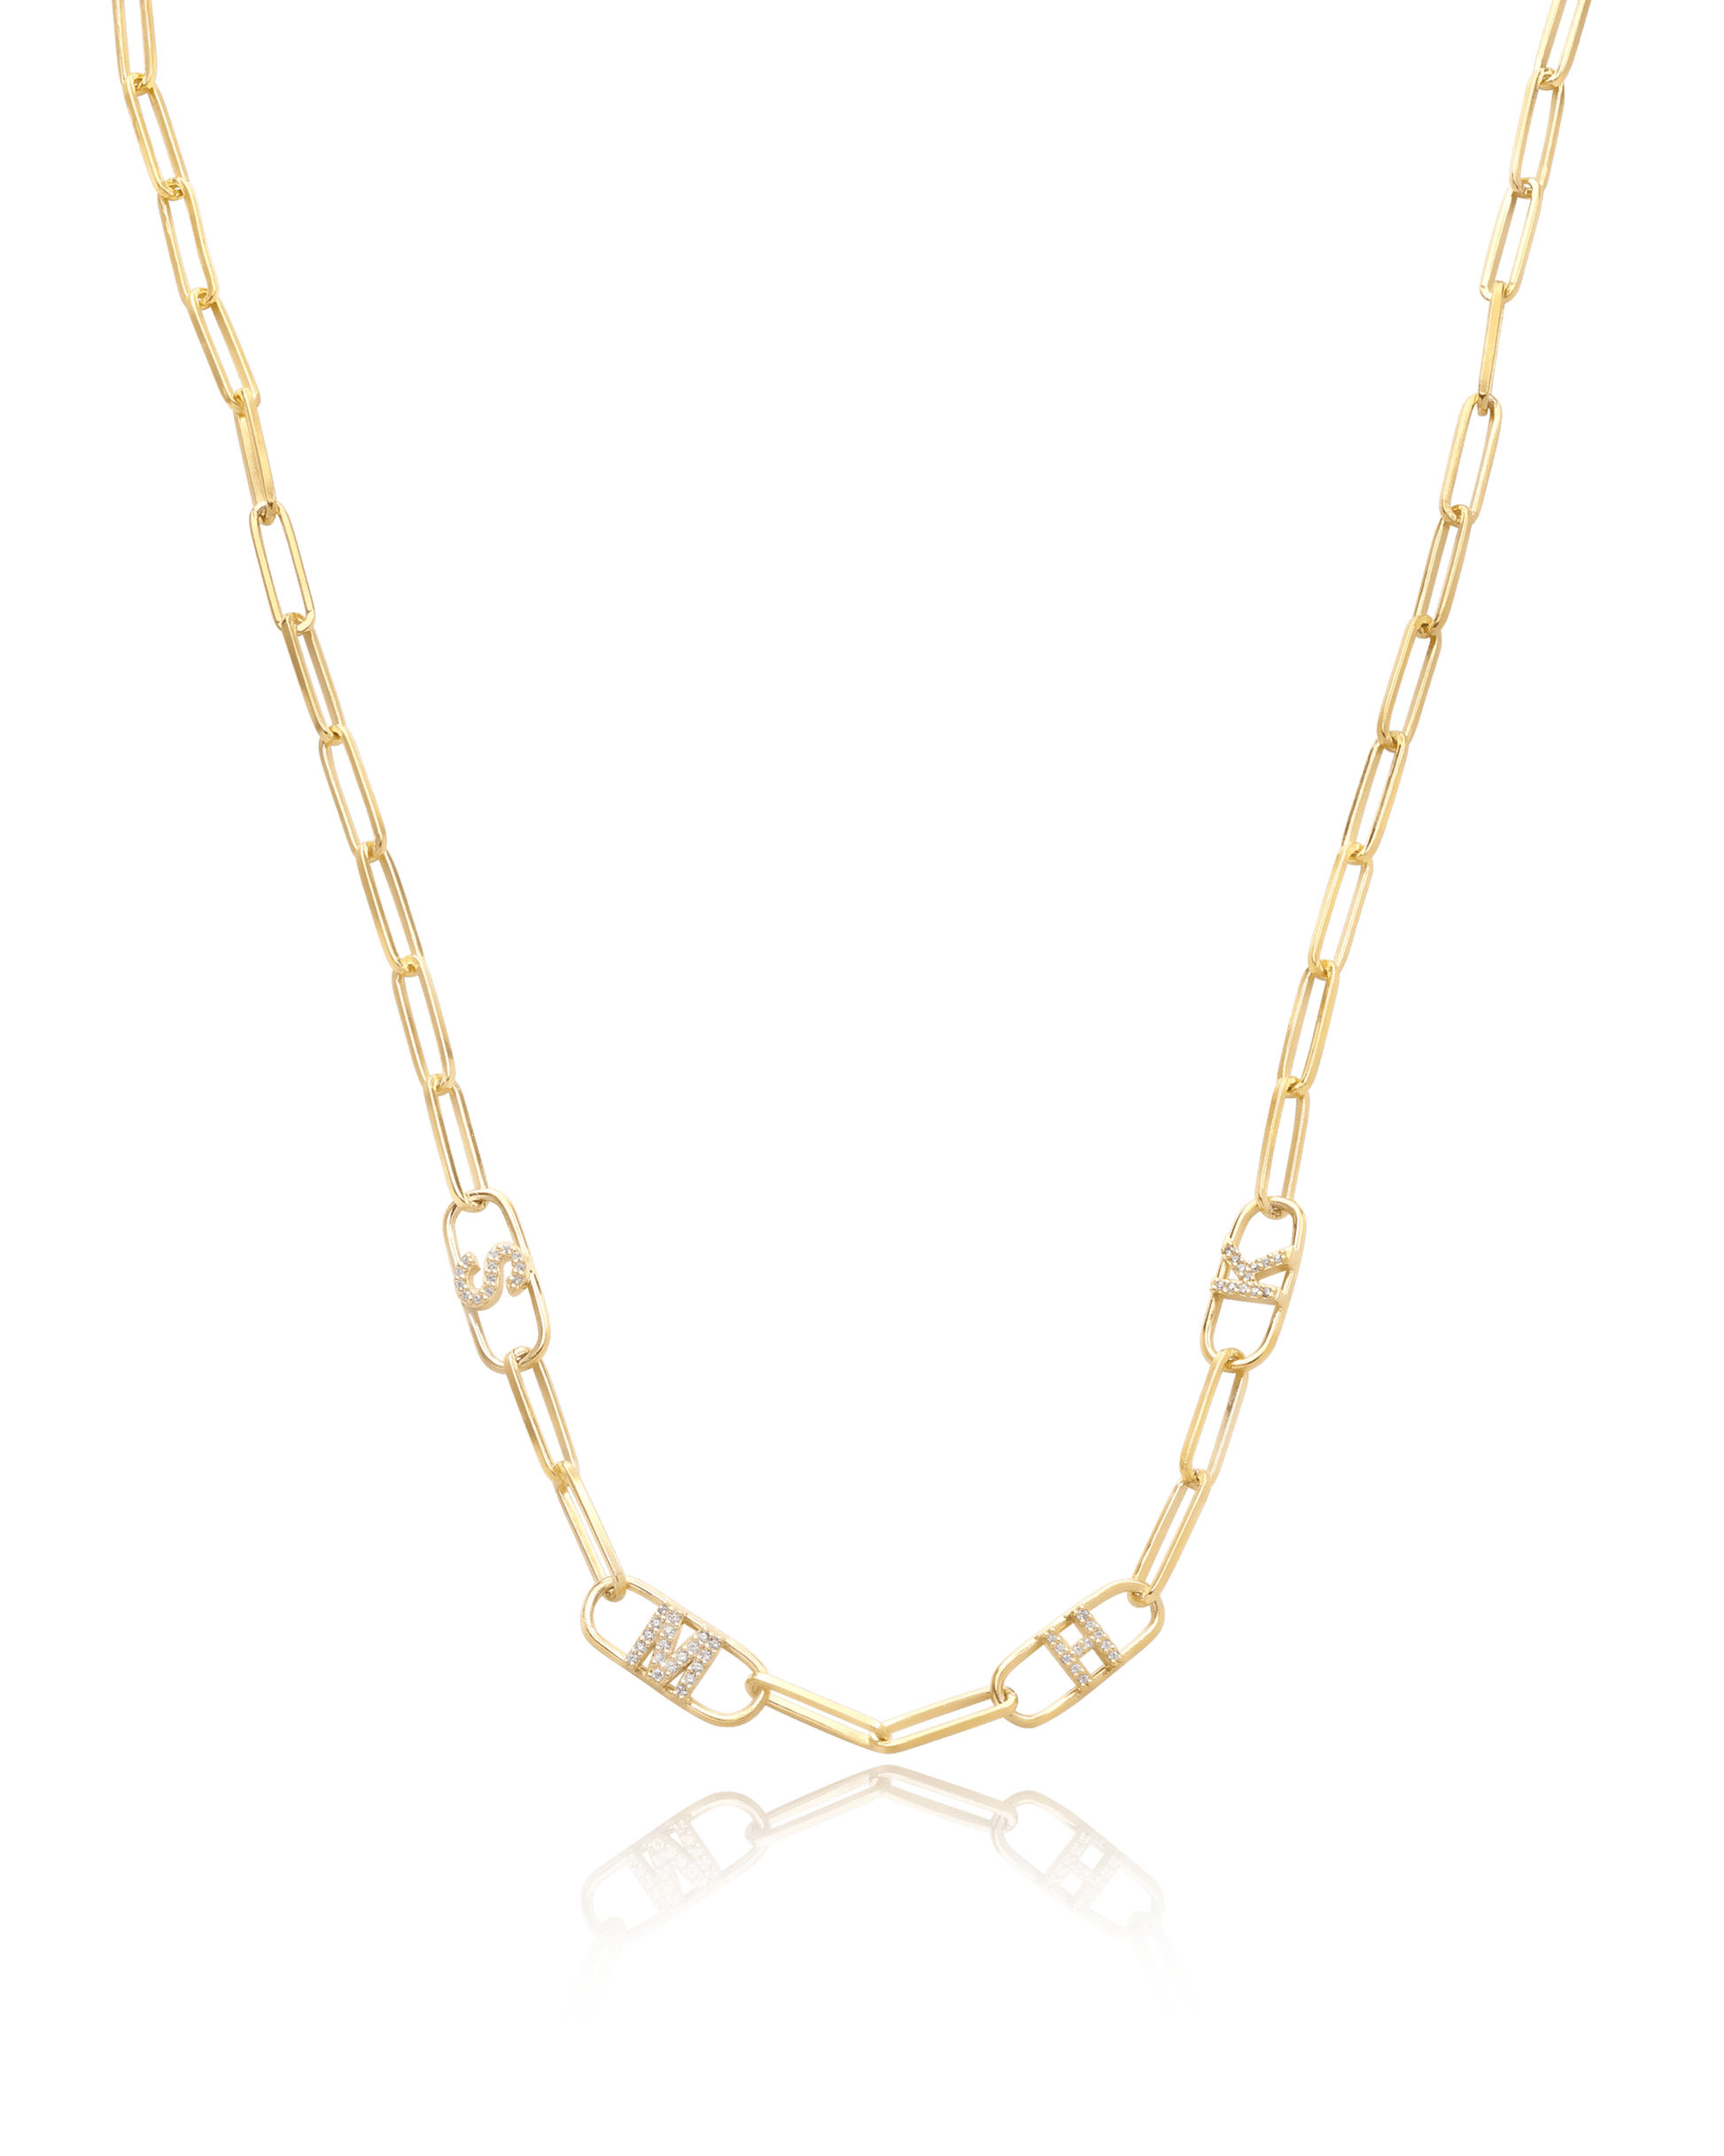 Initials Link Necklace - 925 Sterling Silver Necklaces magal-dev 